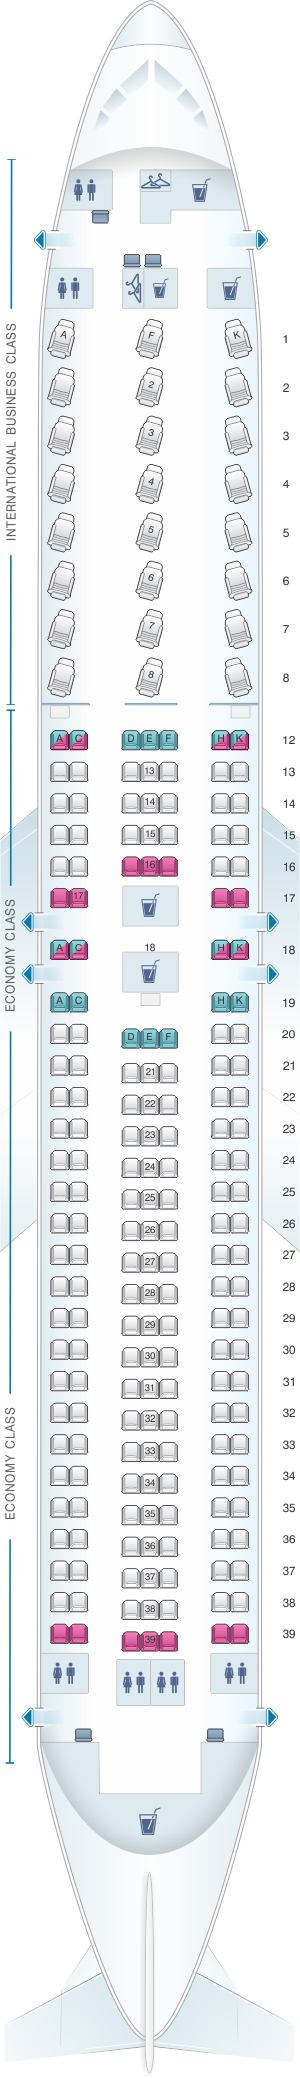 air canada rouge seat selection | Brokeasshome.com